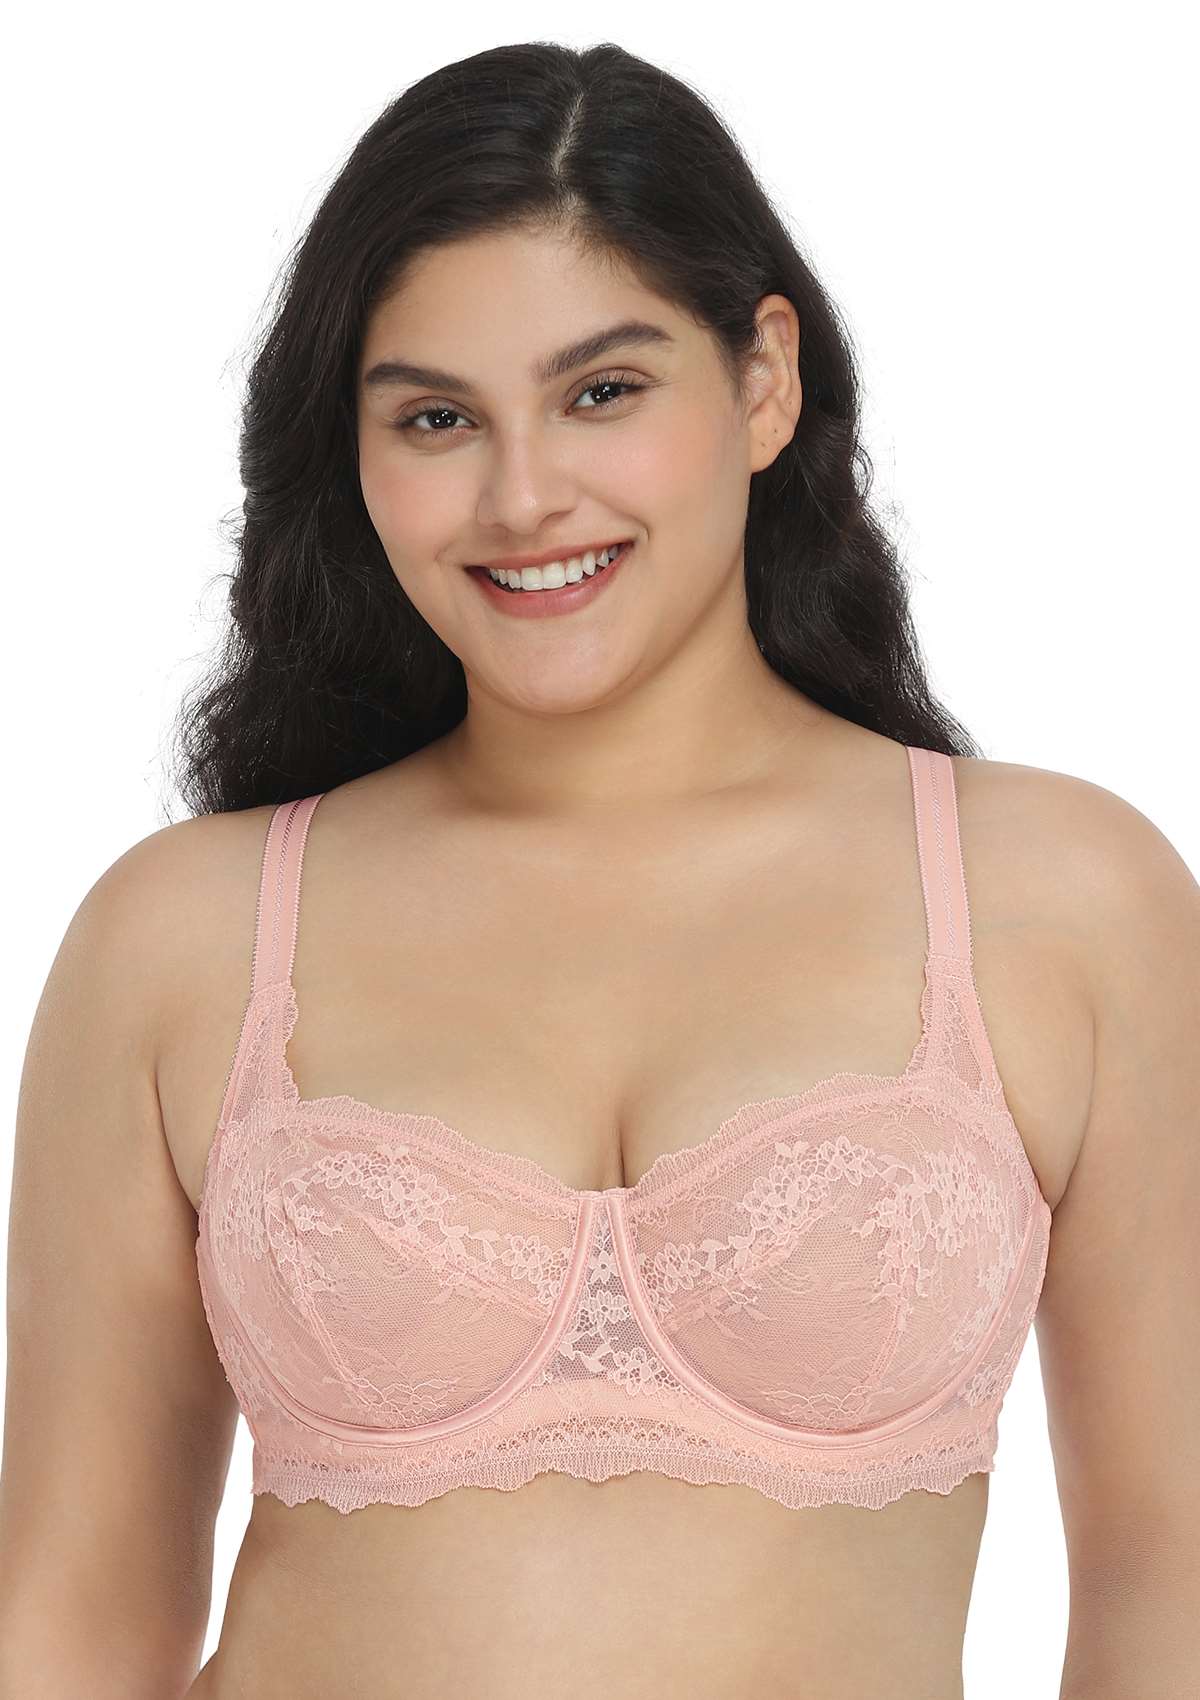 HSIA I Do Floral Lace Bridal Balconette Beautiful Bra For Special Day - Pink / 40 / DDD/F